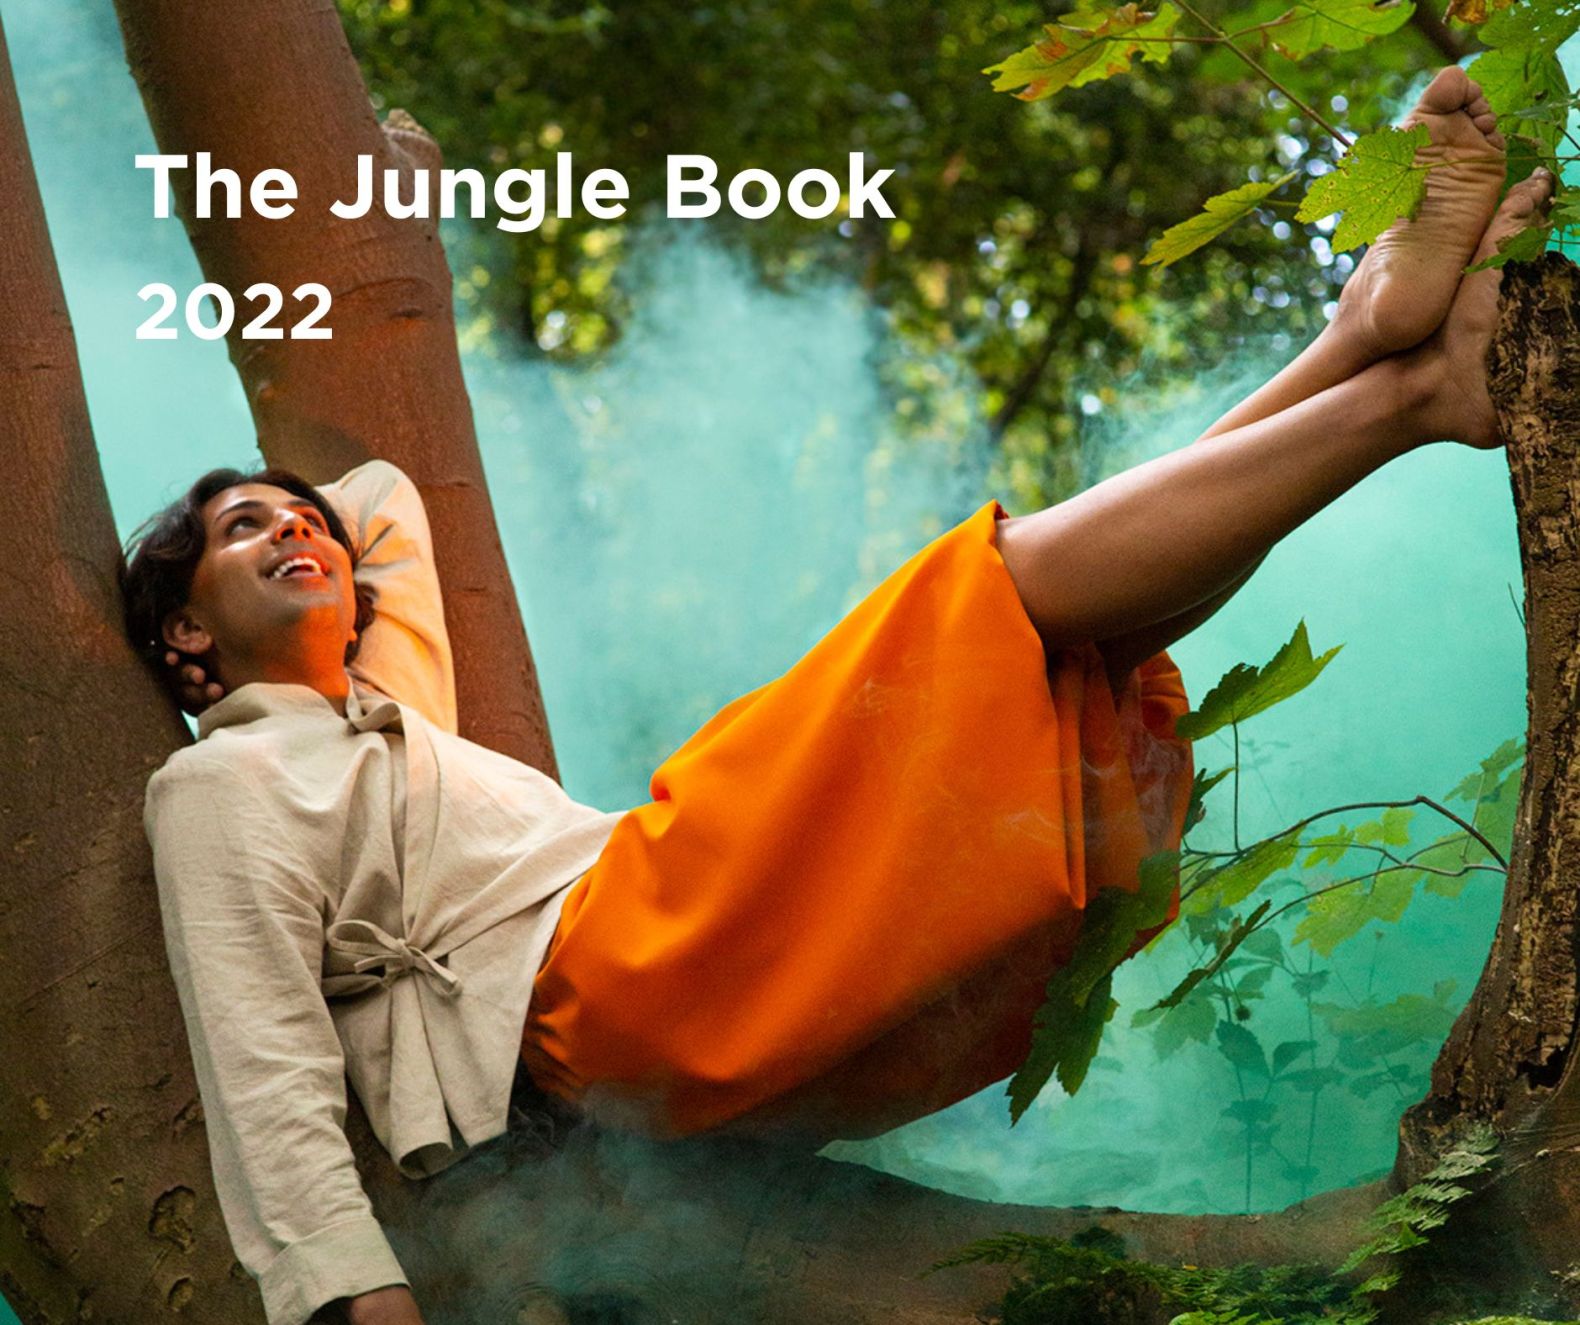 Image from The Jungle Book in 2022